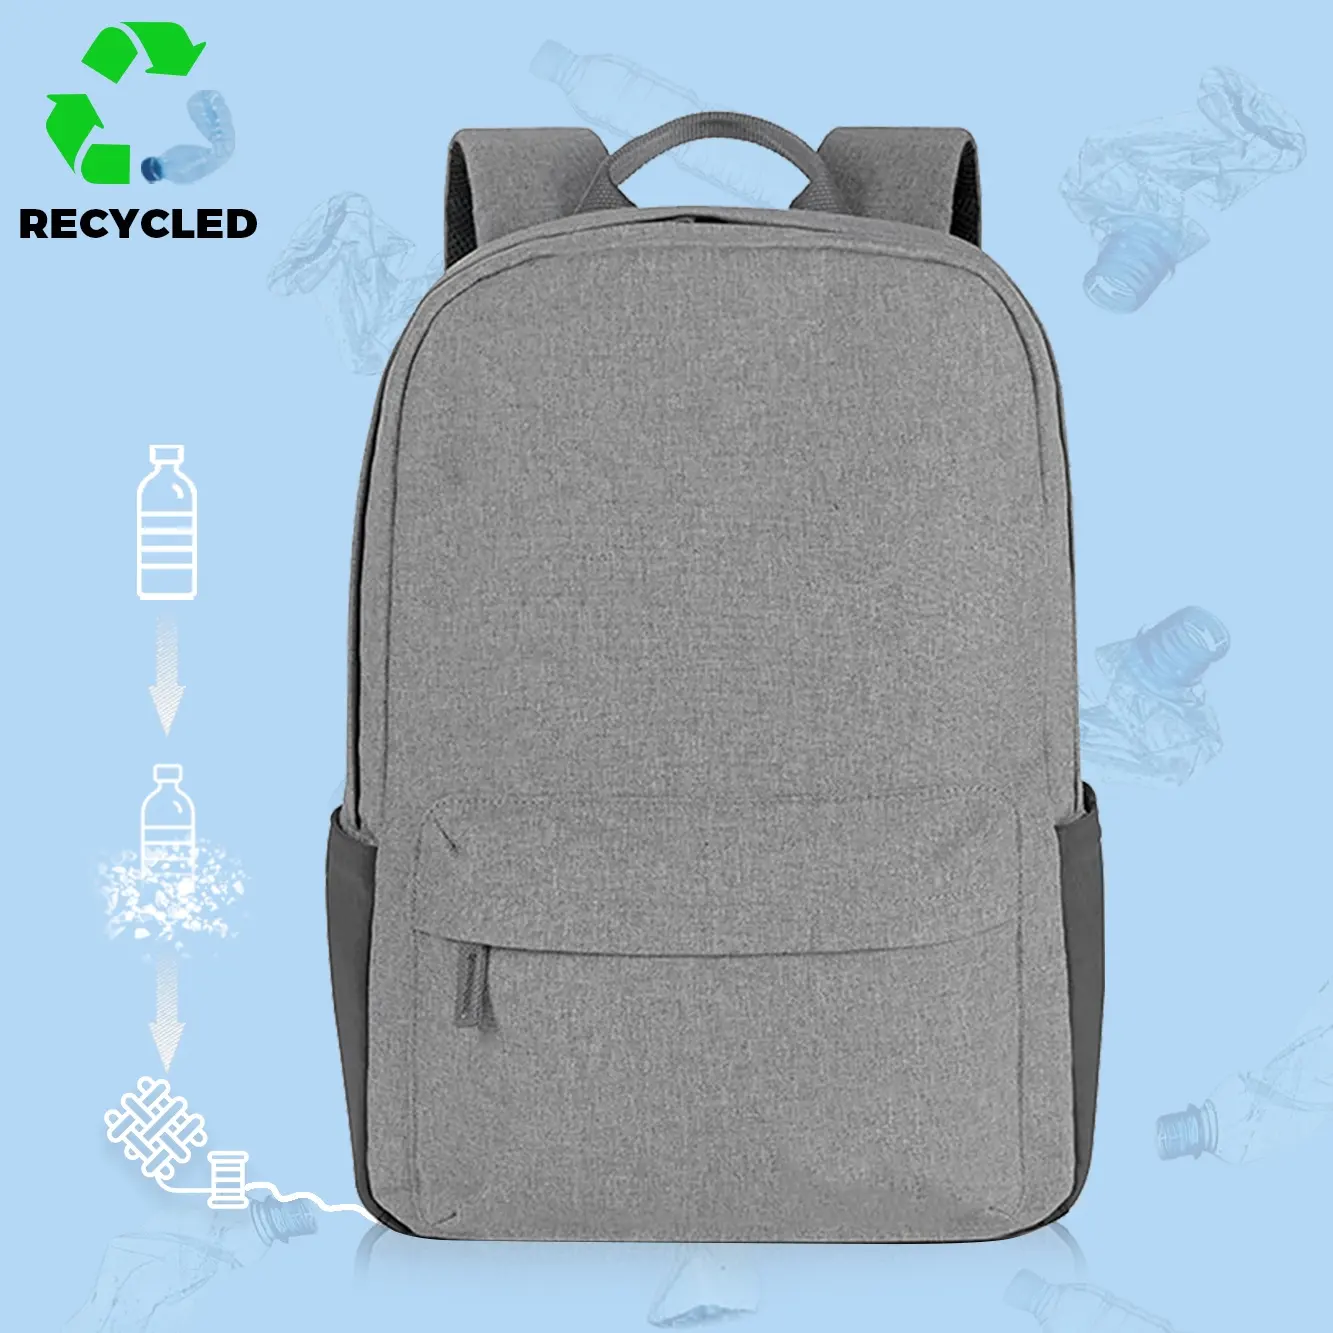 CHANGRONG Custom Recycled Fabric Waterproof Travel Eco Friendly RPET Tote Laptop Backpack Bags For Men